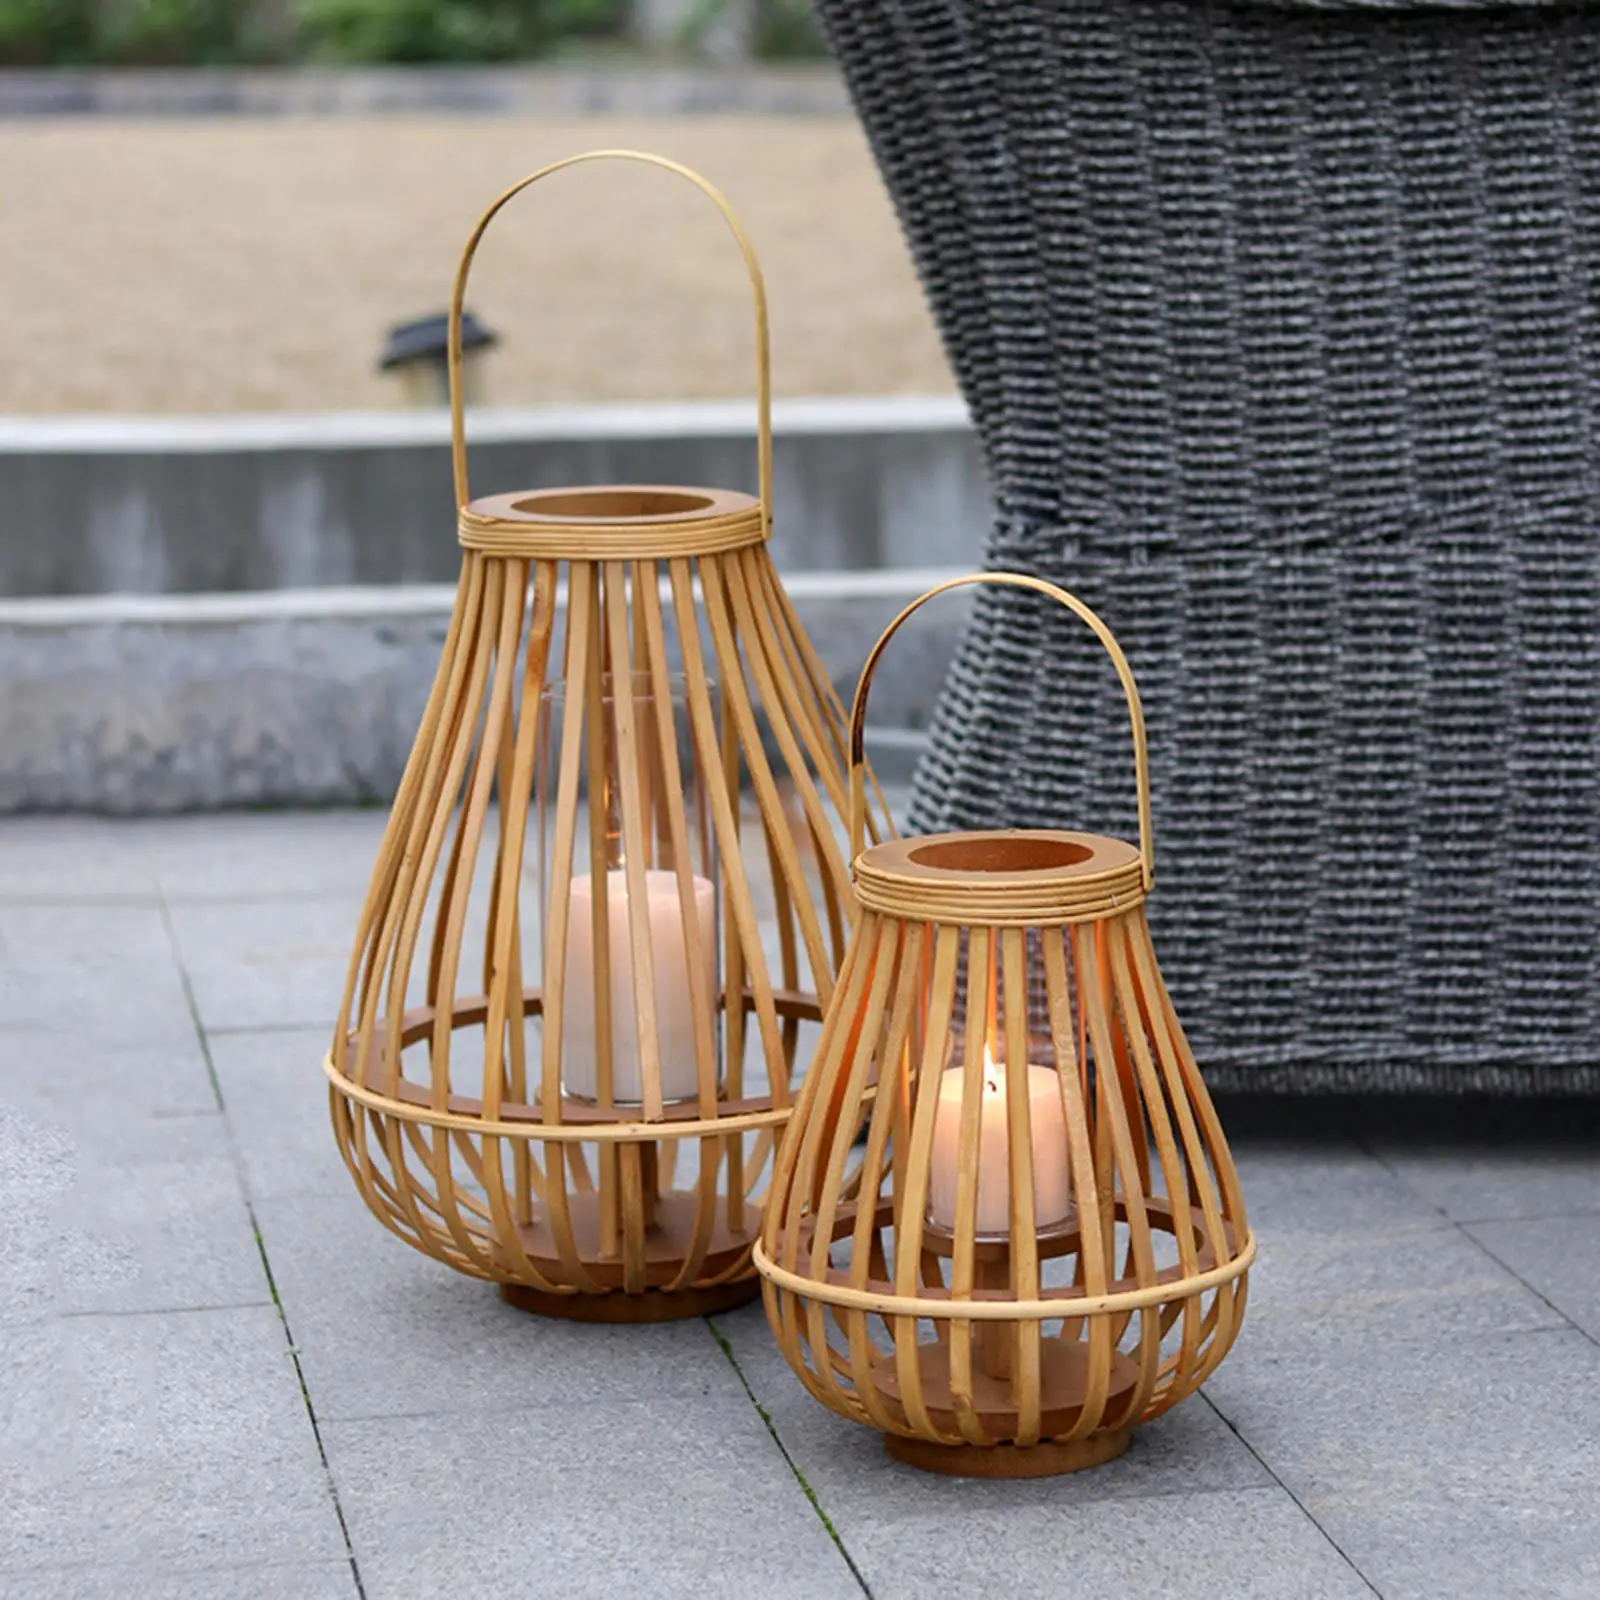 Log Rattan Floor Lantern Hand Woven Hanging Windproof Ornaments Candlestick Candle Holder Home Balcony Decoration Crafts